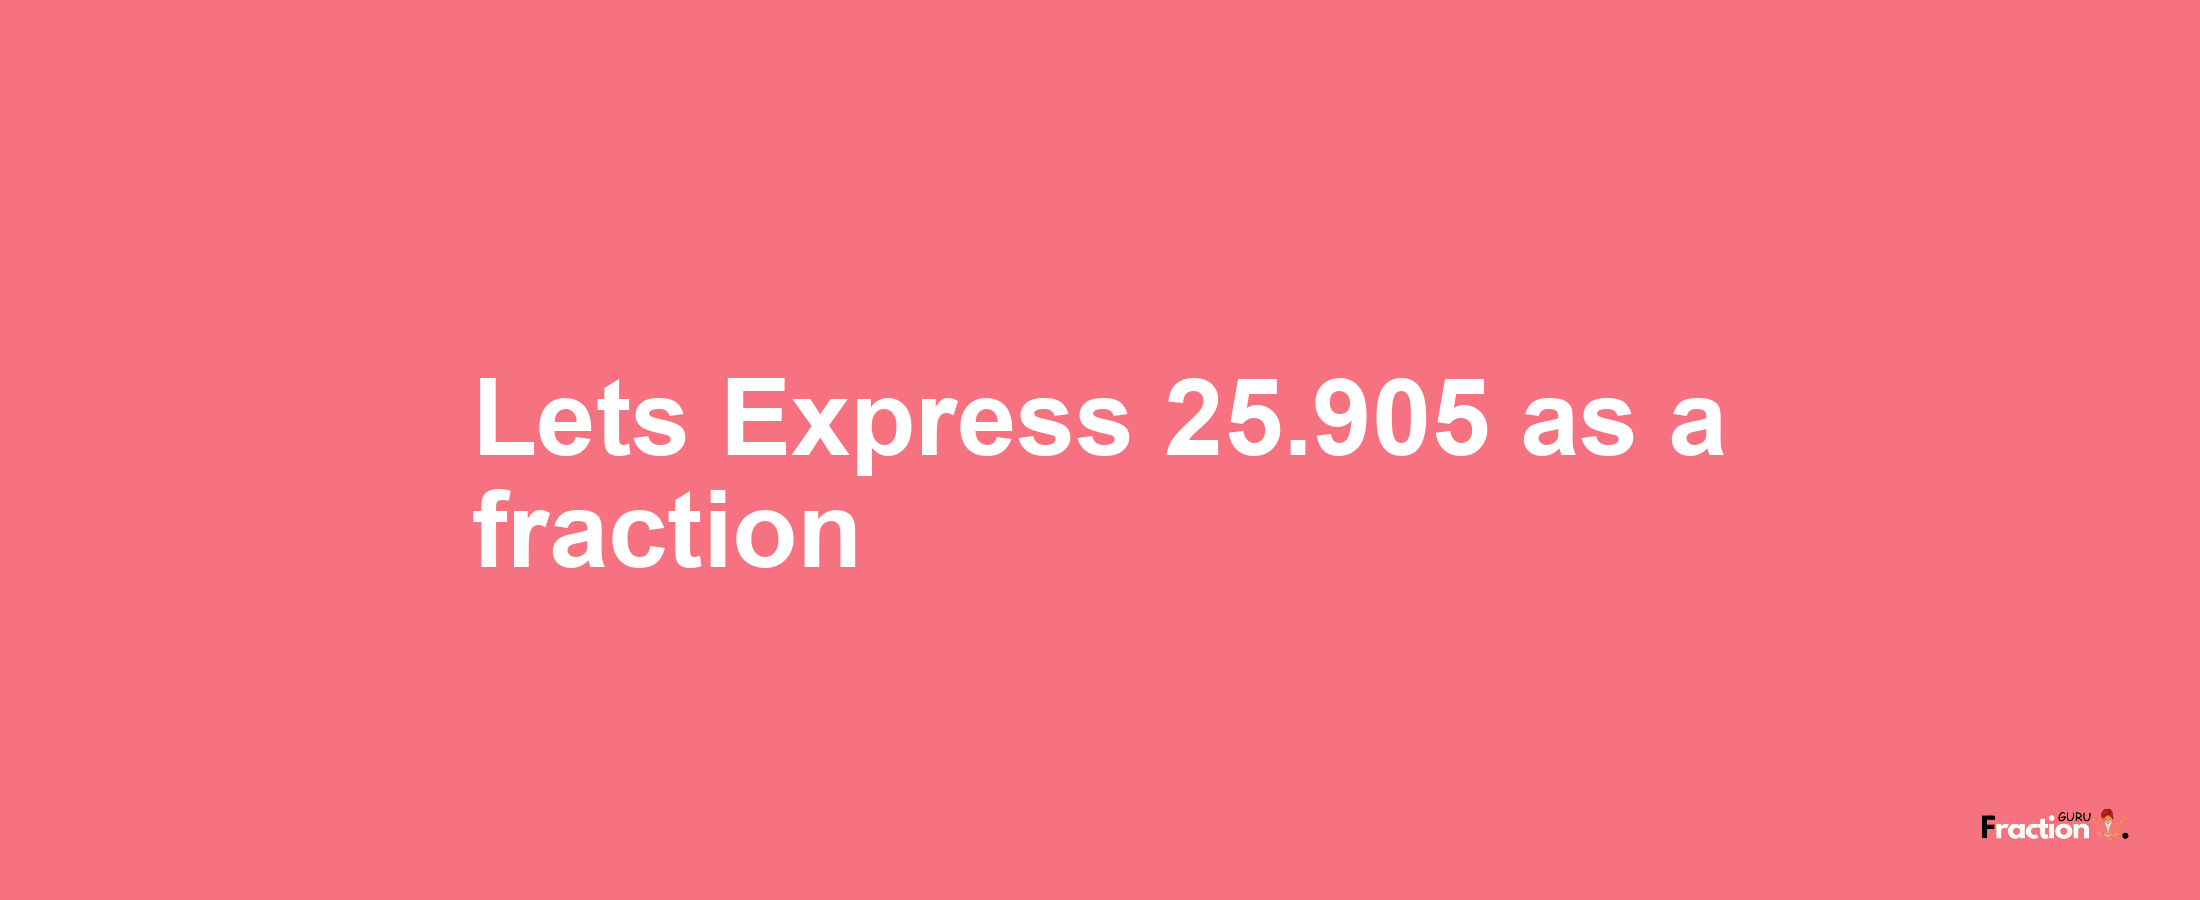 Lets Express 25.905 as afraction